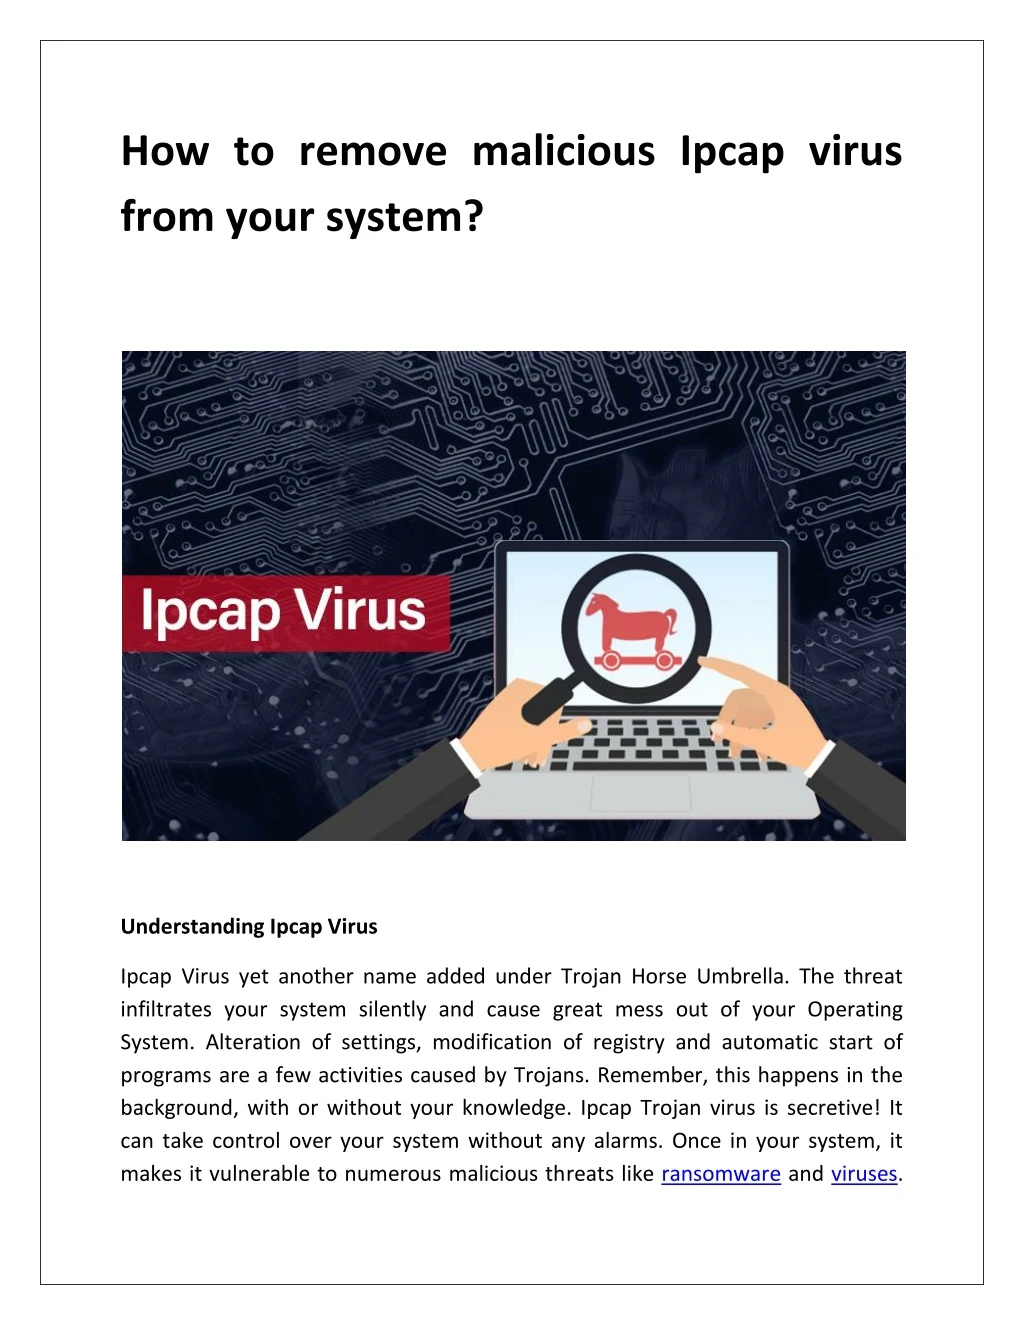 how to remove malicious ipcap virus from your